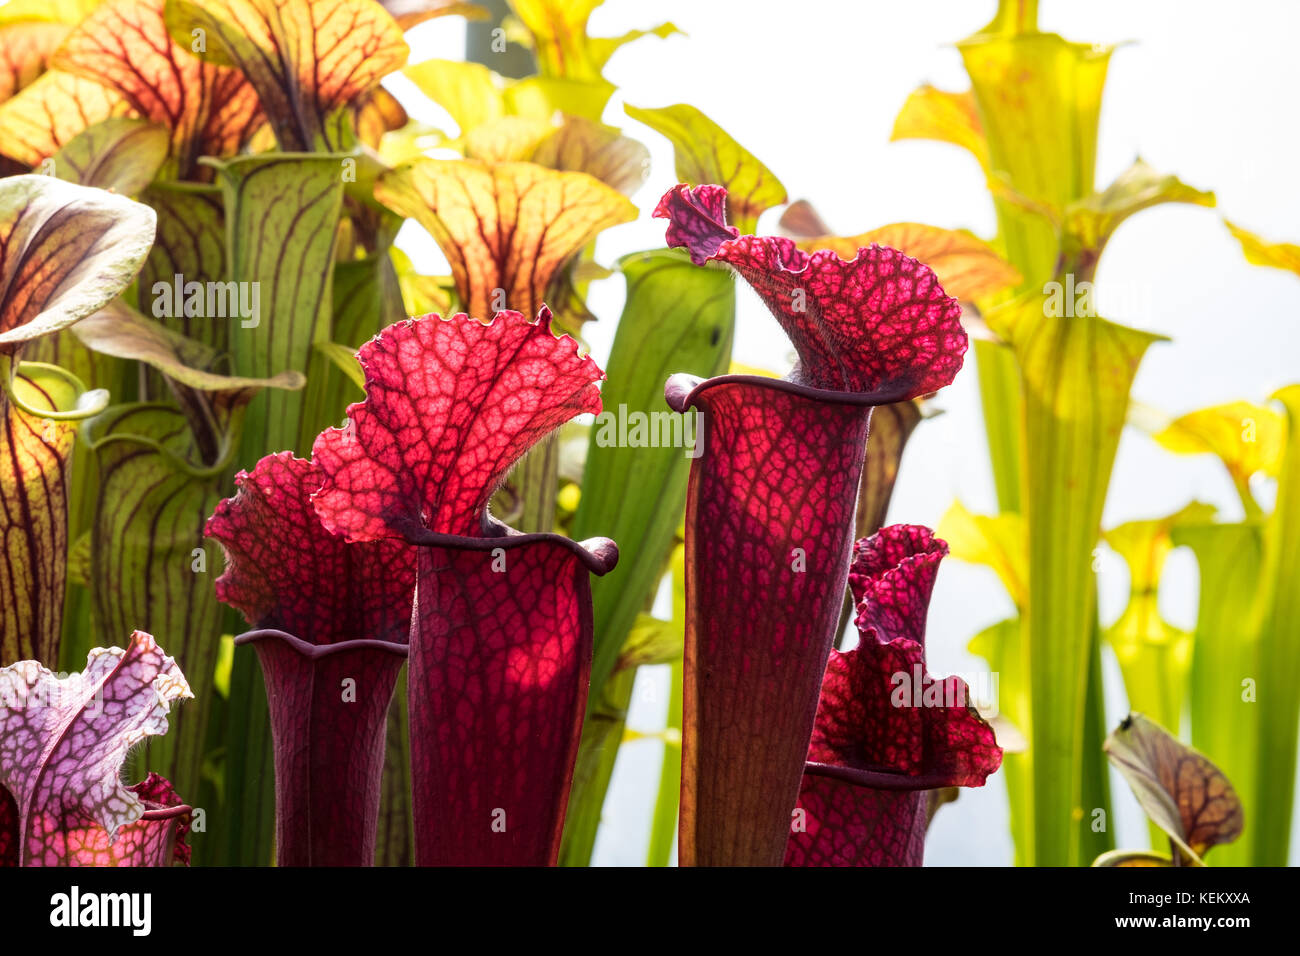 sarracenia, the pitcher plant, which devours insect by luring them into their tube shaped leaves. Stock Photo